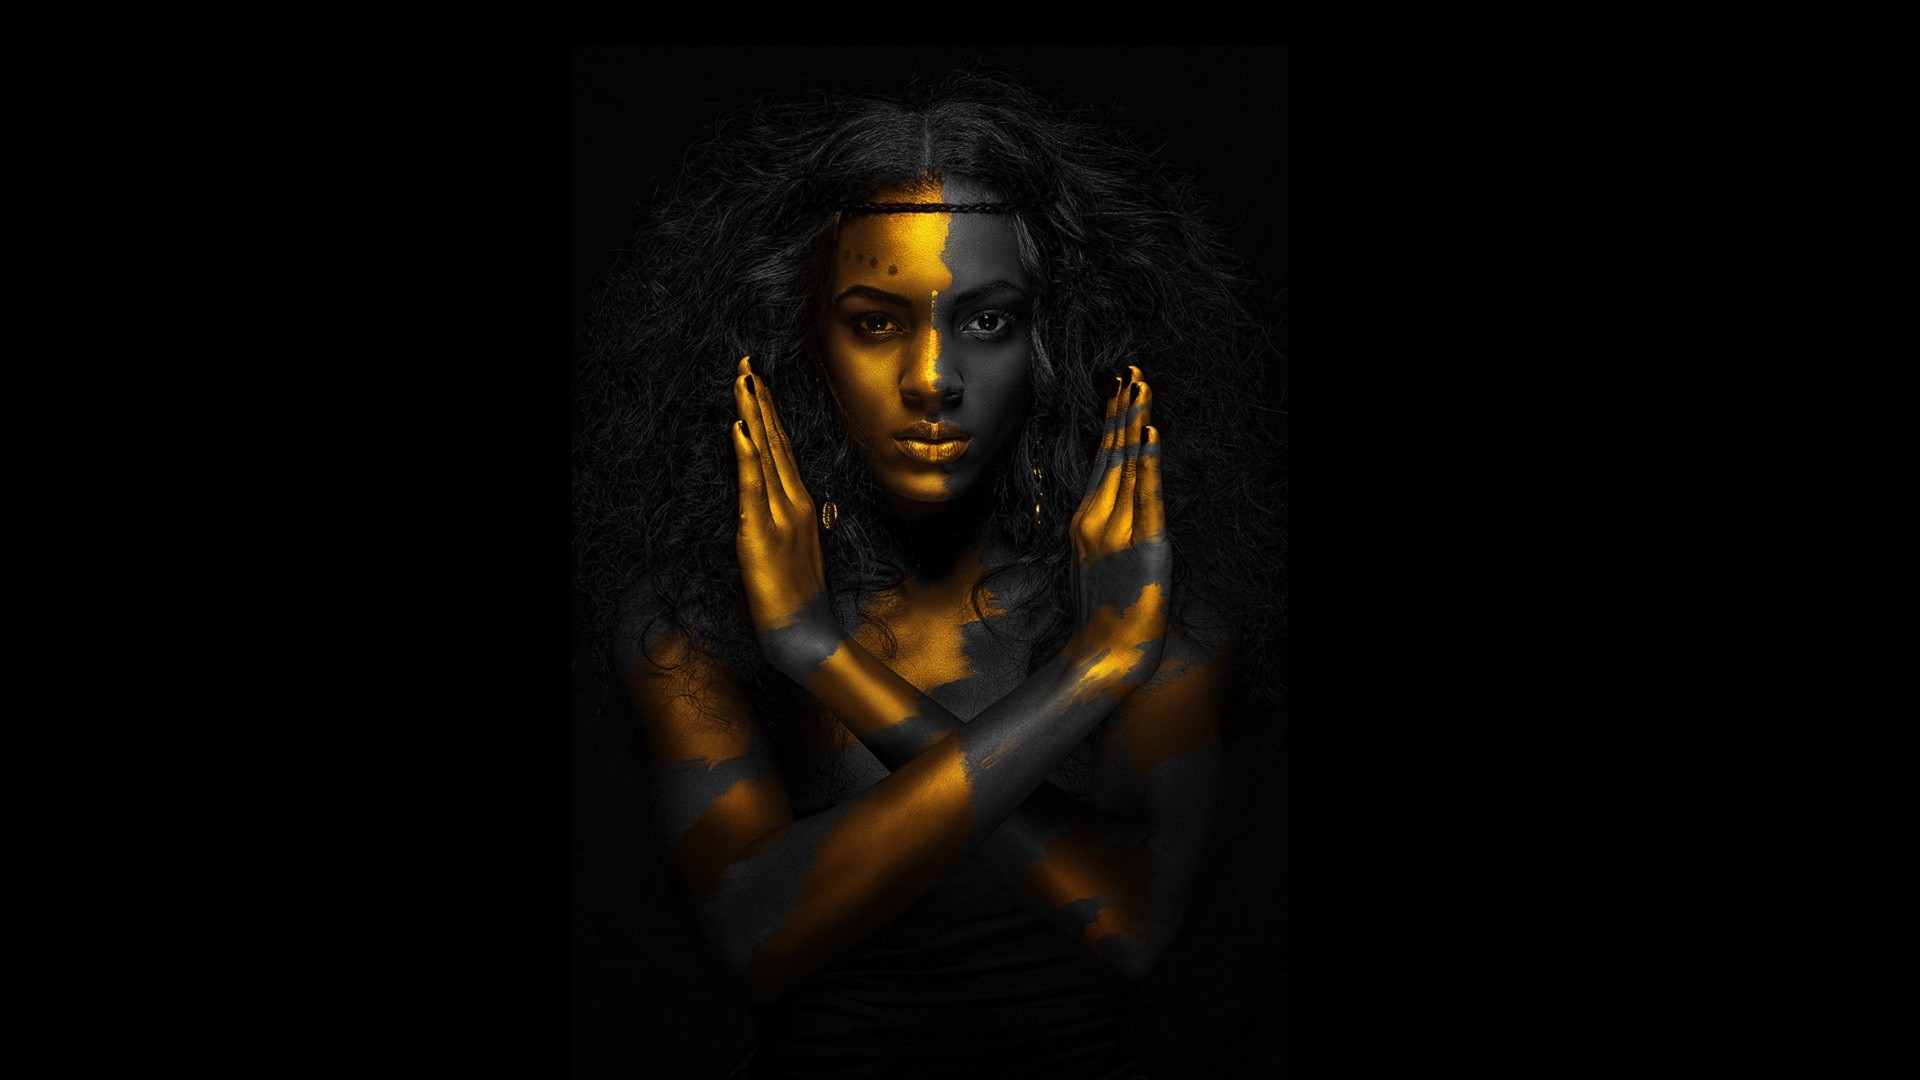 People 1920x1080 body paint women model face portrait dark black gold black background simple background hands looking at viewer